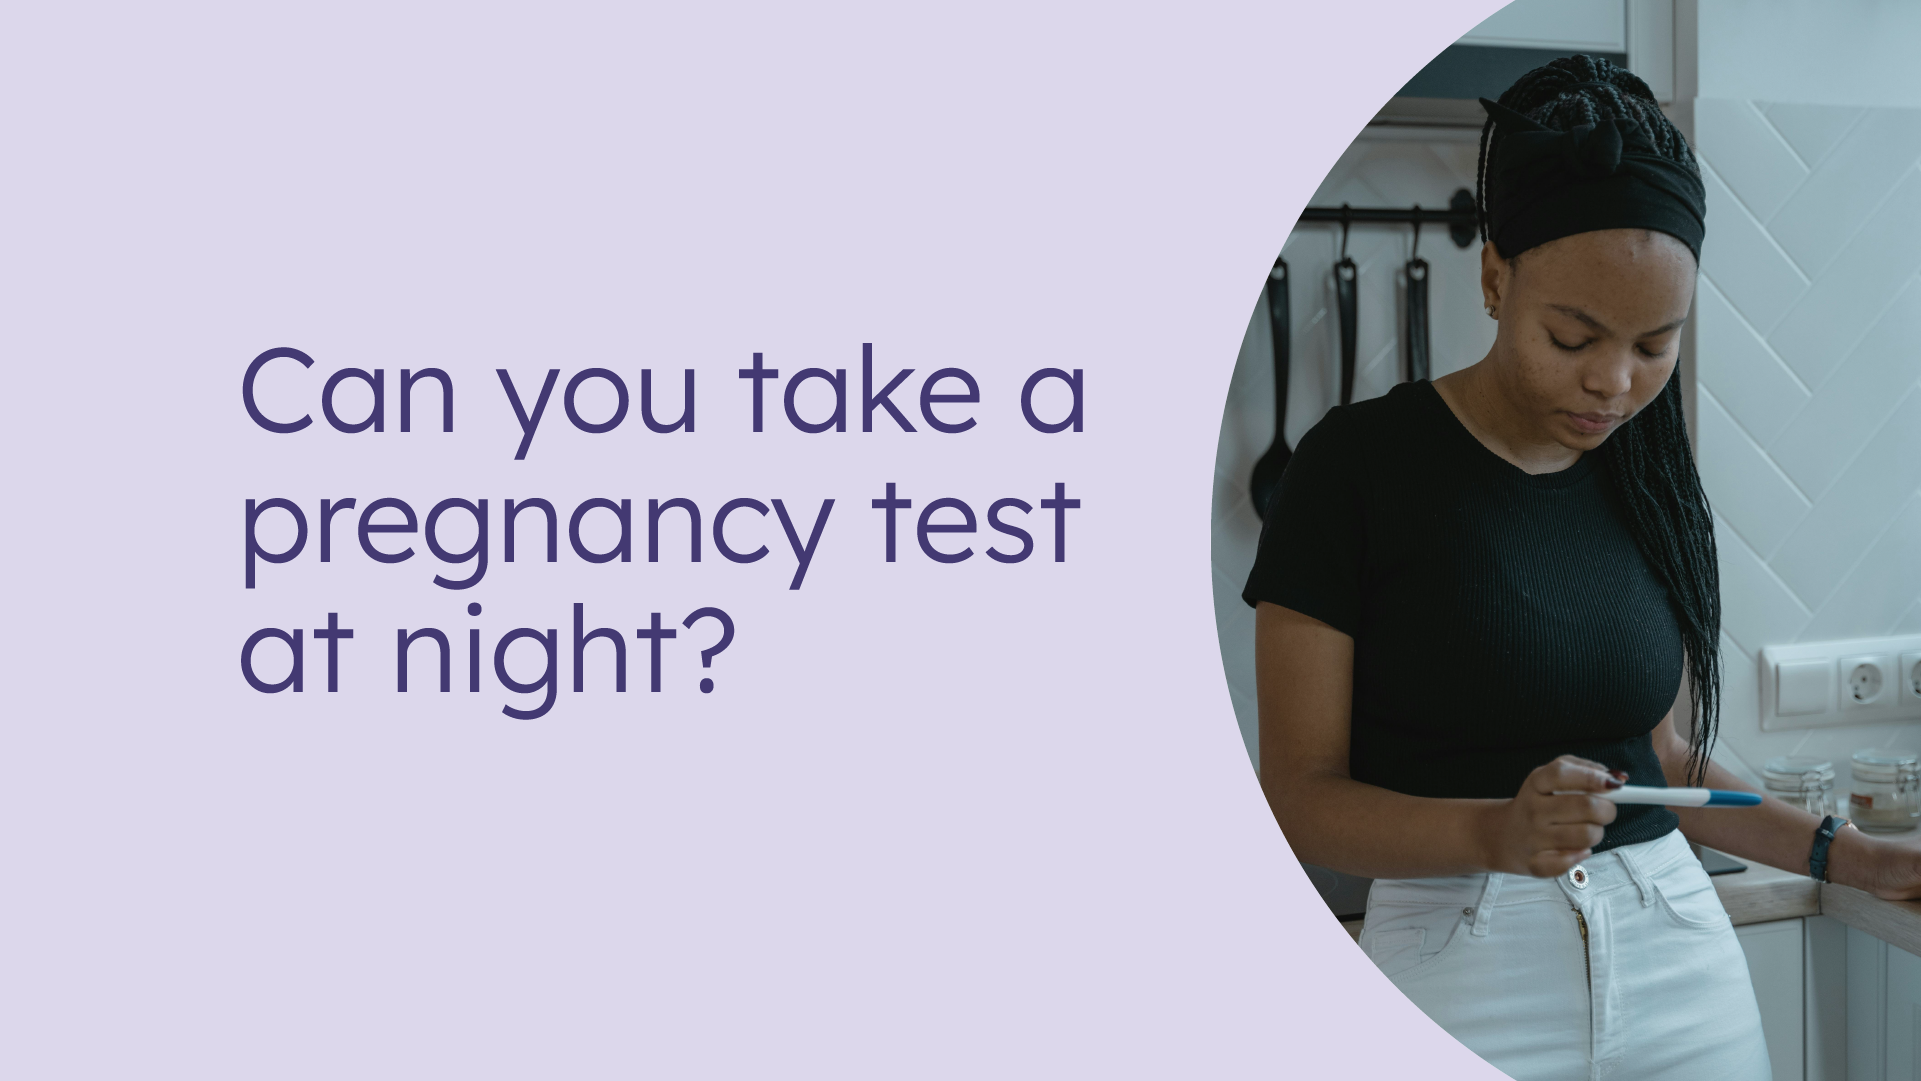 Can you take a pregnancy test at night?